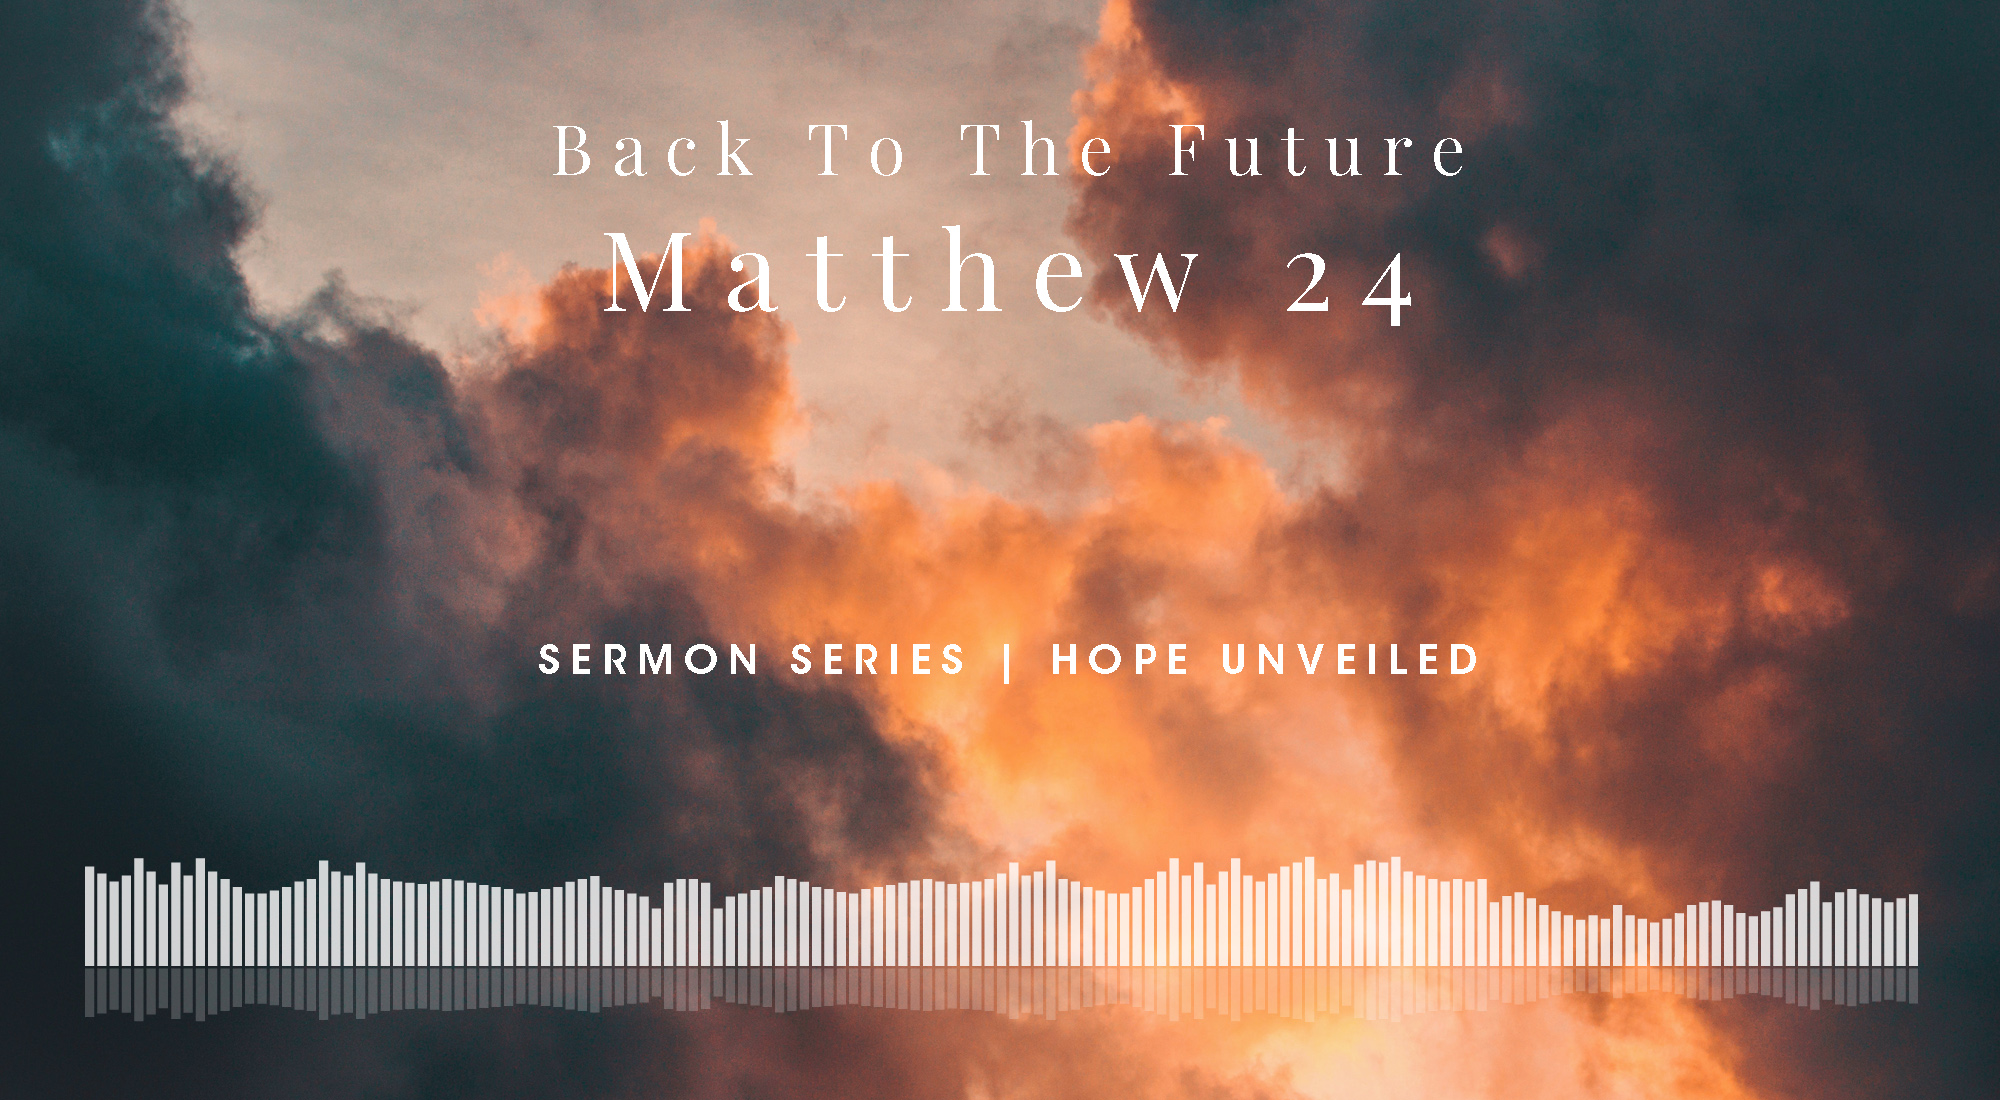 Back To The Future, Matthew 24 From Our Hope Unveiled Sermon Series